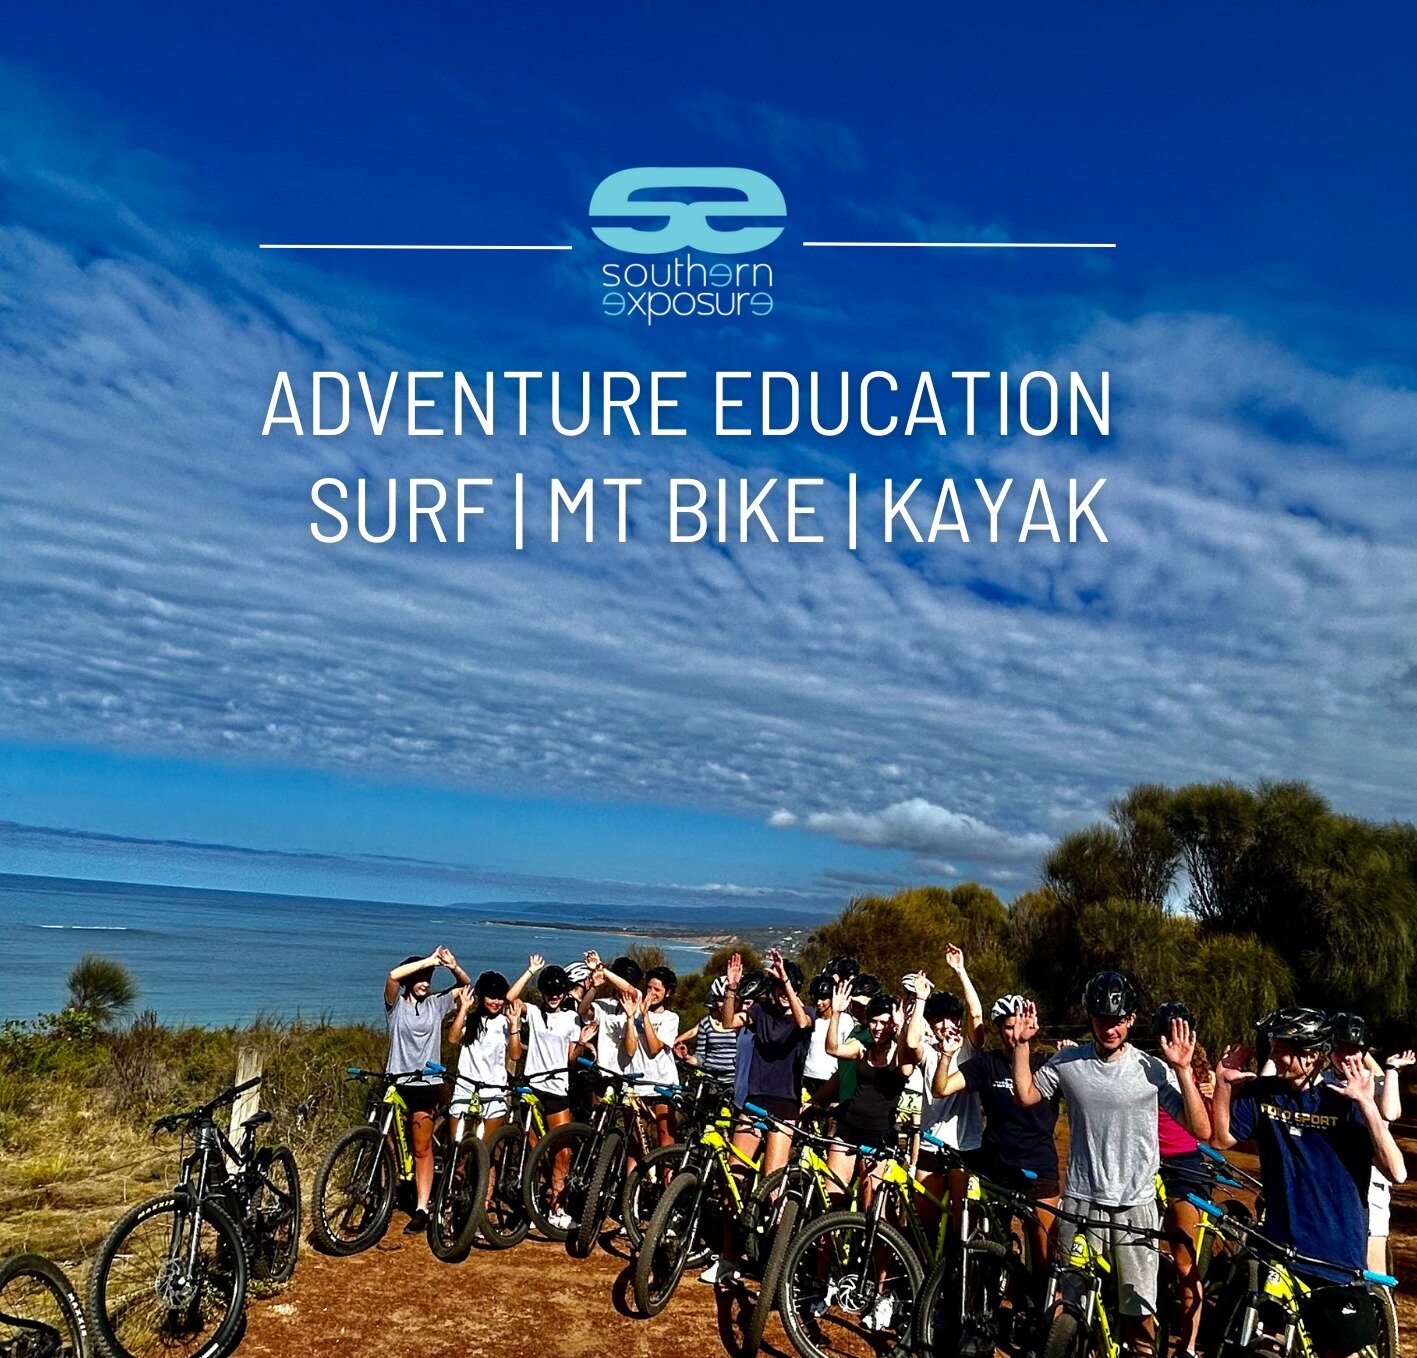 MOUNTAIN BIKING ALONG THE SURF COAST

Get out of the classroom and be active today. 
Southern Exposure has everything you need to jump on the bike. 
For the thrill seeking bike riders to those who are just getting started - our instructors and guides